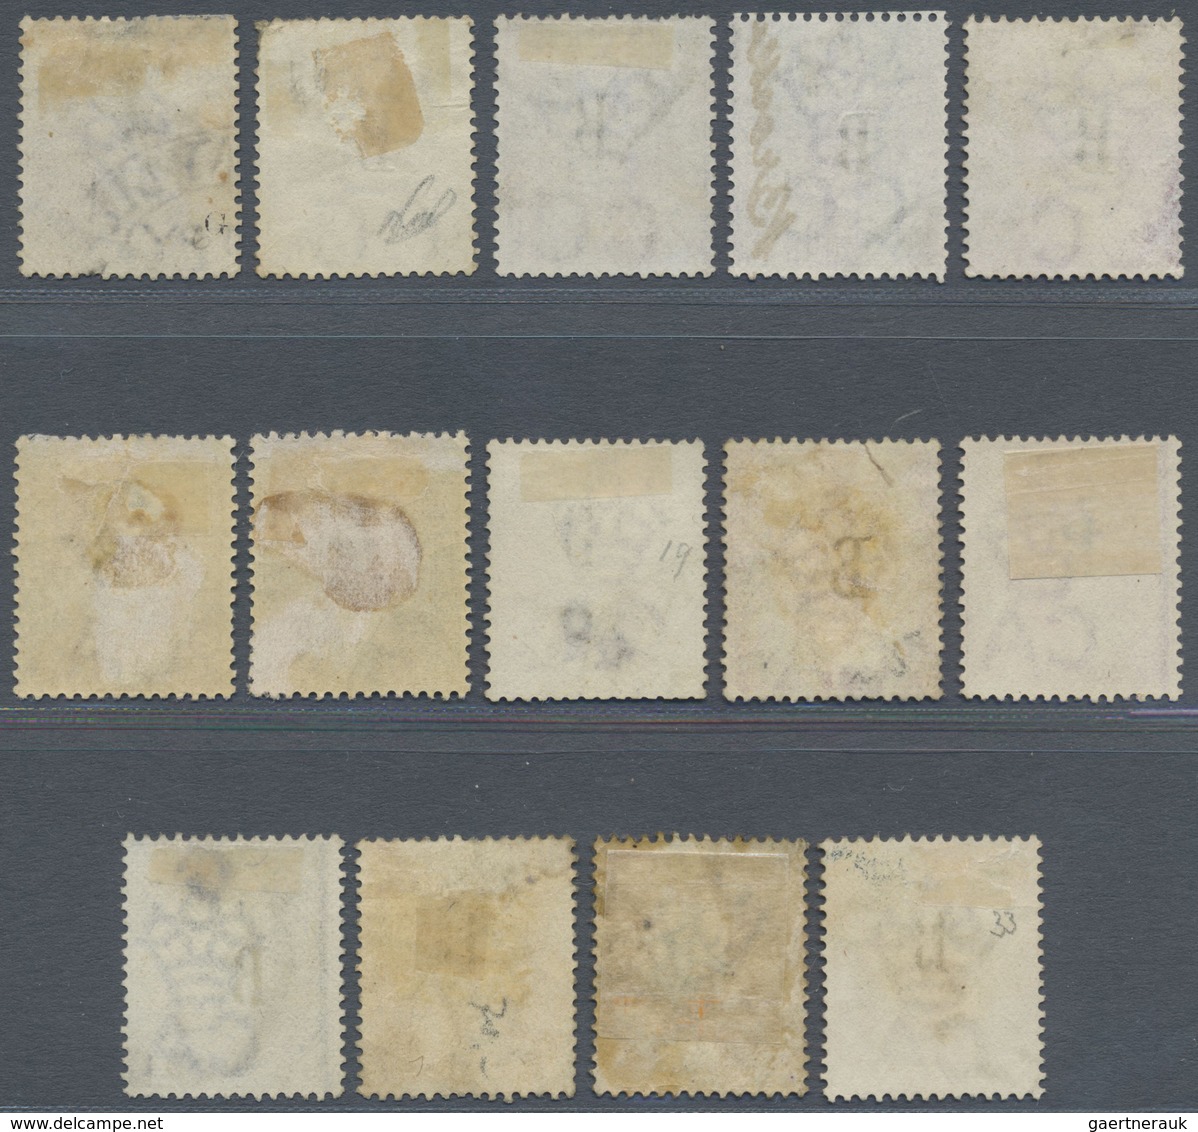 O/* Malaiische Staaten - Straits Settlements - Post In Bangkok: 1882-85: Group Of 14 QV Stamps Of Strait - Straits Settlements